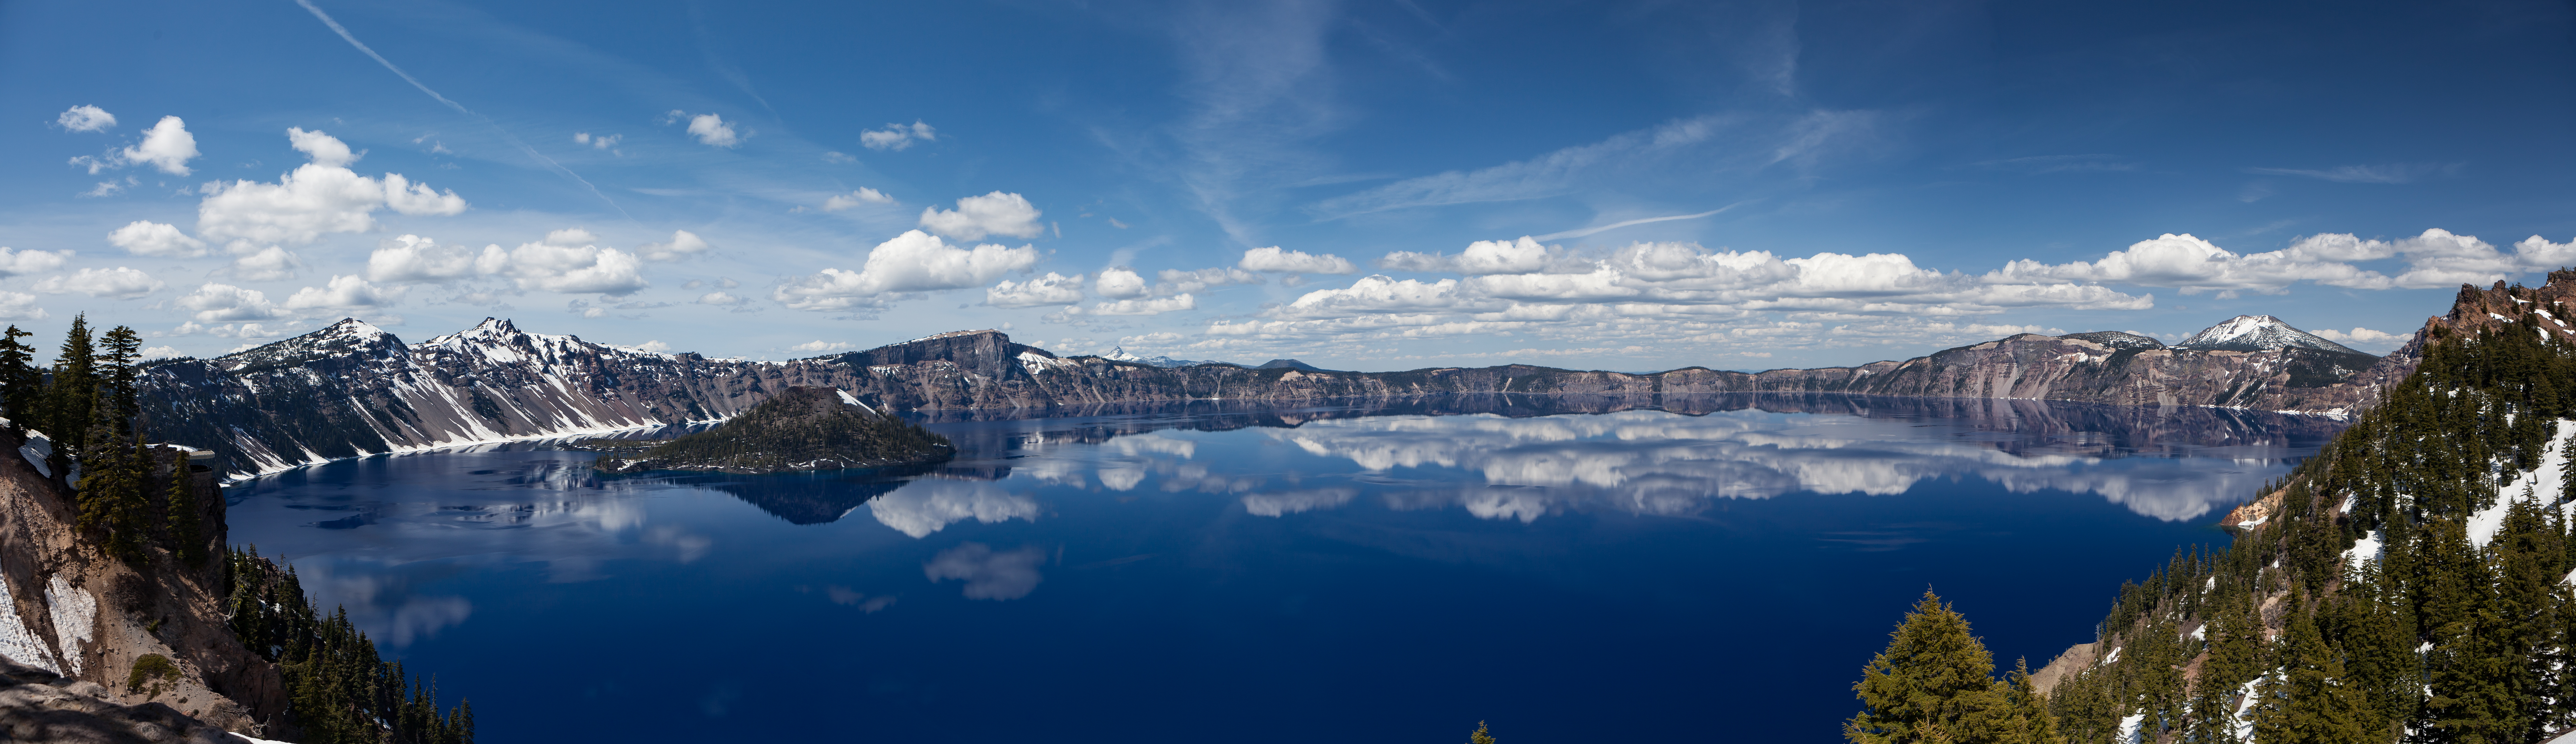 snow, Winter, Lake, Reflection, Trees, Clouds, Mountains, Photography, Sky, Crater Lake (Oregon) Wallpaper